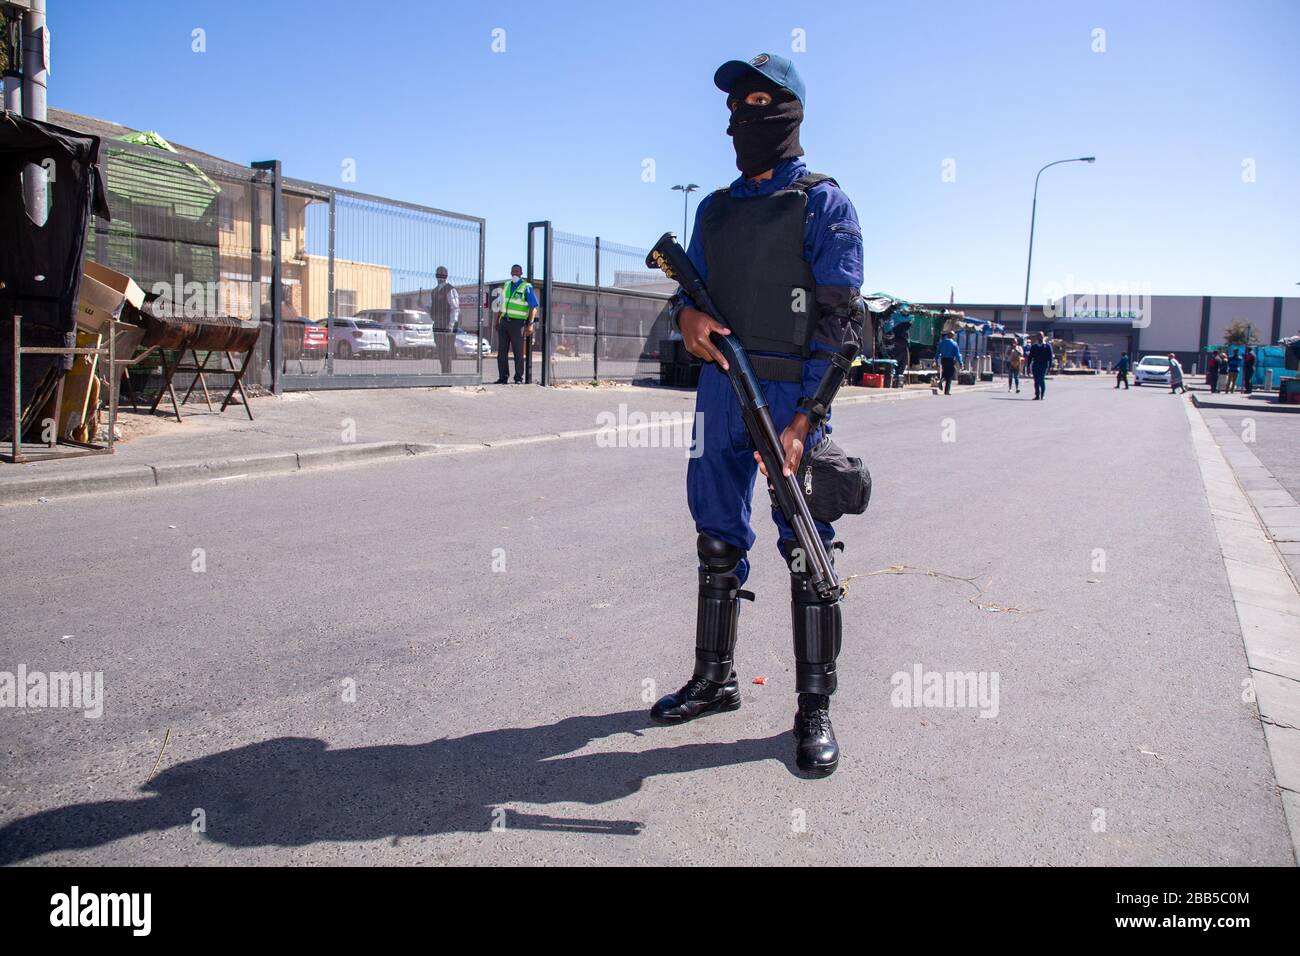 Cape Town, South Africa. 30th Mar, 2020. a member of TSU Protection Services stands guard inside a gate at a SASSA (South African Social Security Agency) paypoint in Philippi as hundreds of people wait their turn to enter to collect their money after the South African government declared a 21 day COVID-19 lockdown as part of the State of National Disaster declaration by President Cyril Ramaphosa. The Health Ministry has asked residents to observe the regulations, practise hygiene, stay at home and practise social distancing. Credit: Roger Sedres/Alamy Live News Stock Photo